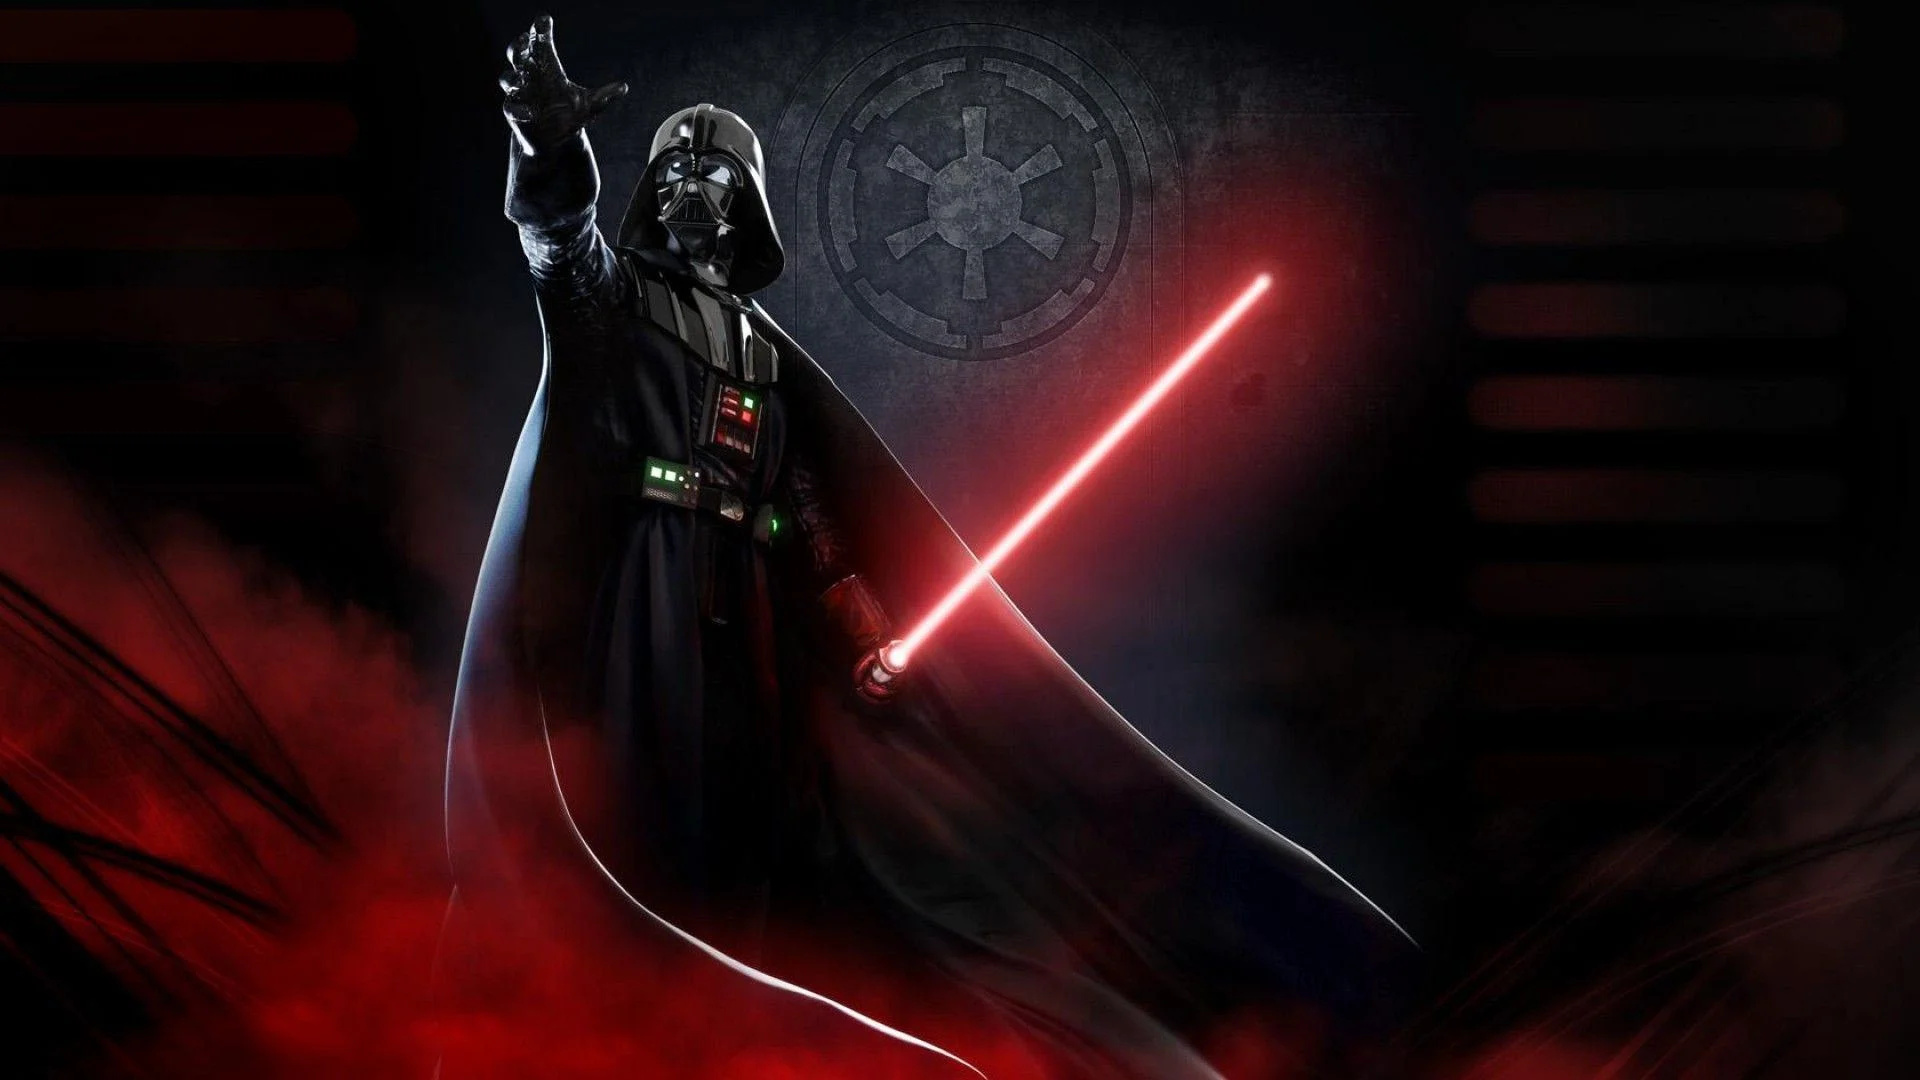 Sith: Dark Lord of the Sith, One of the Emperor's most trusted servants. 1920x1080 Full HD Background.